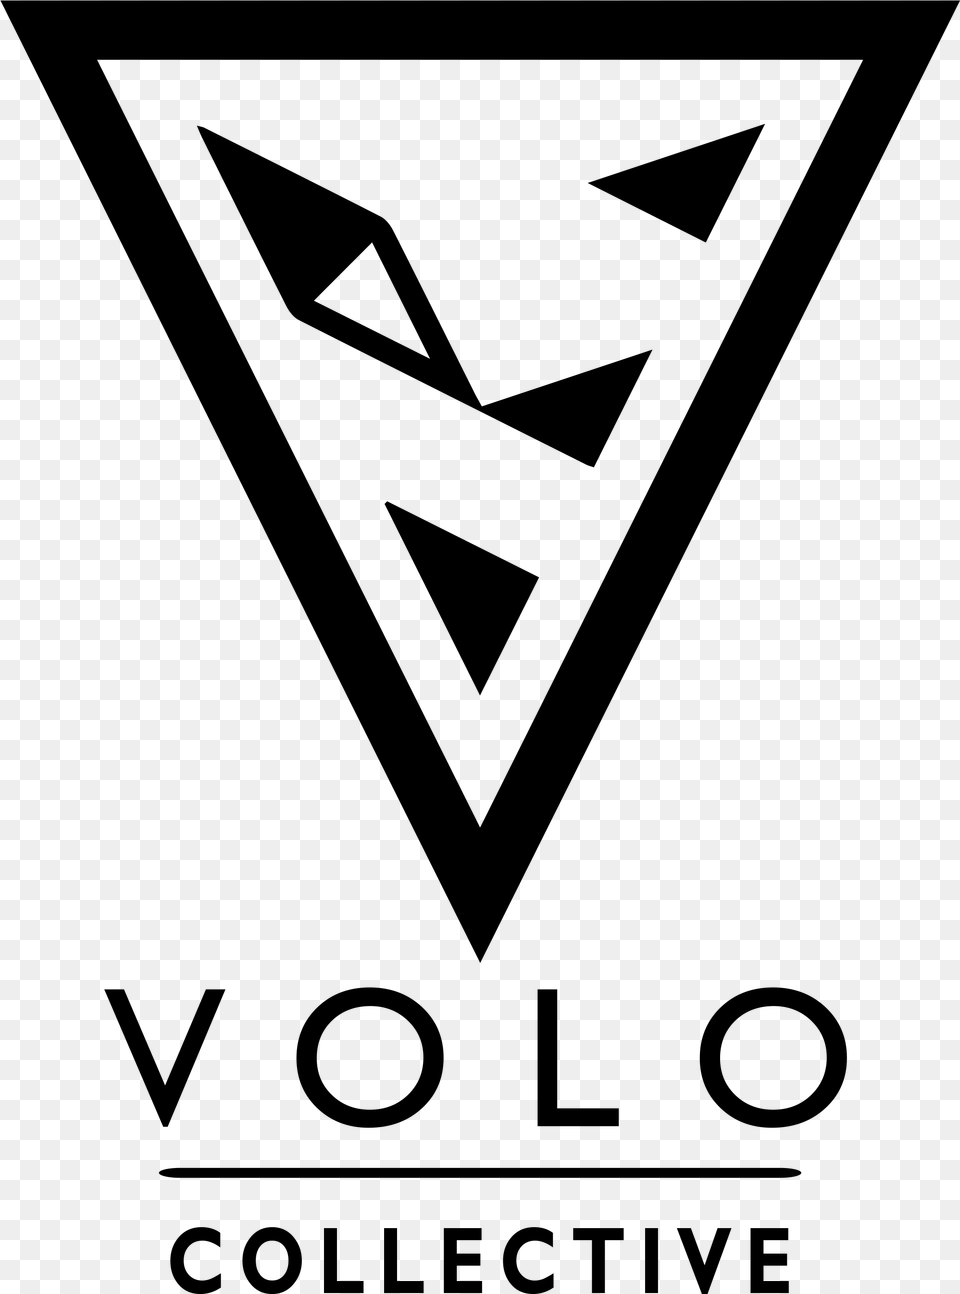 Volo Collective Triangle, Gray Free Png